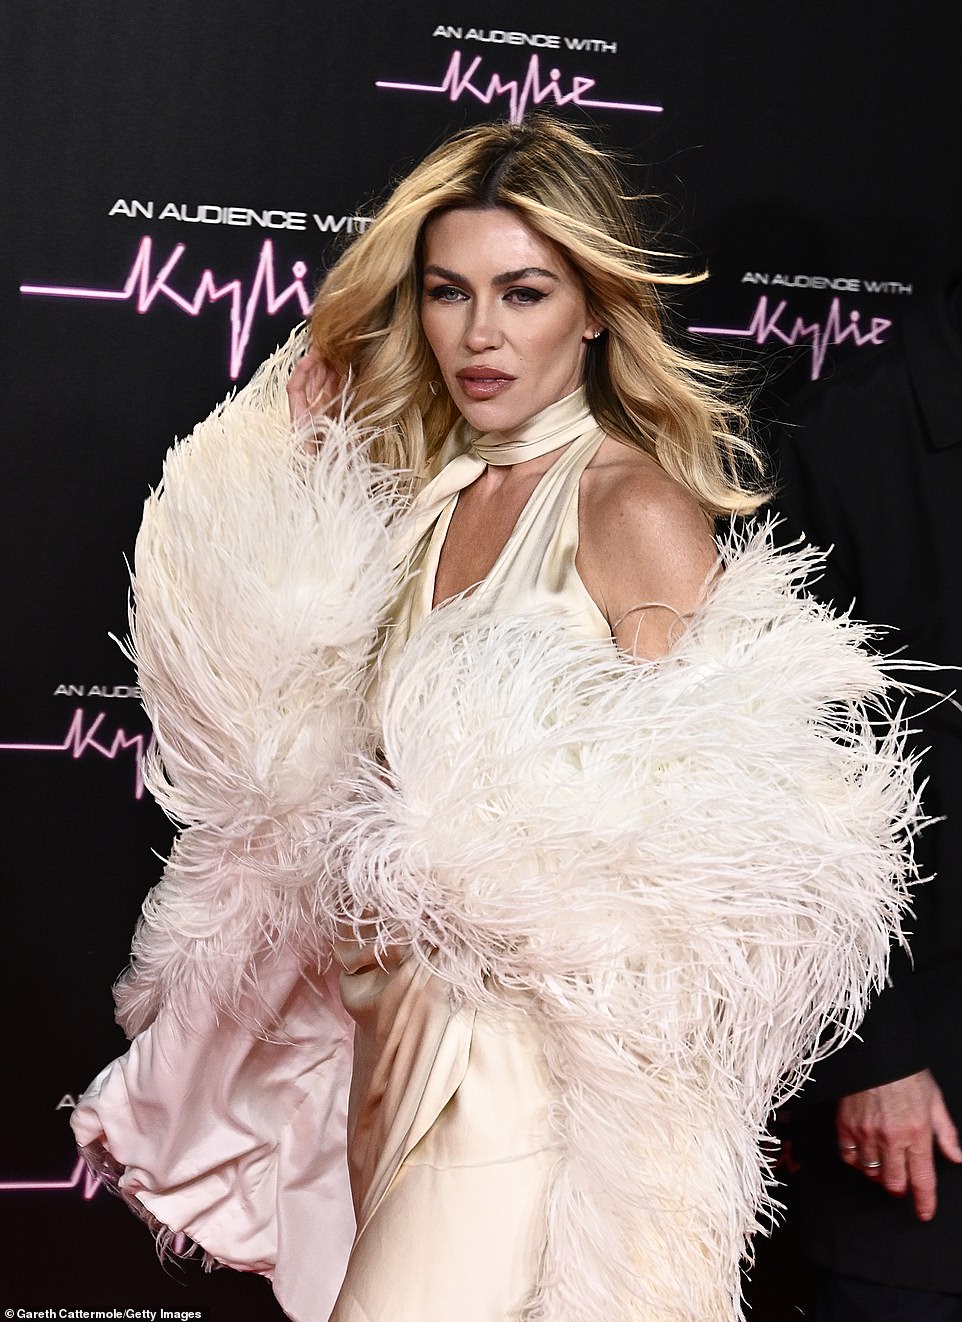 Abbey slipped her feet into a pair of black, sparkly heels as she strutted her stuff on the red carpet, before Australian Kylie, 55, who took to the stage